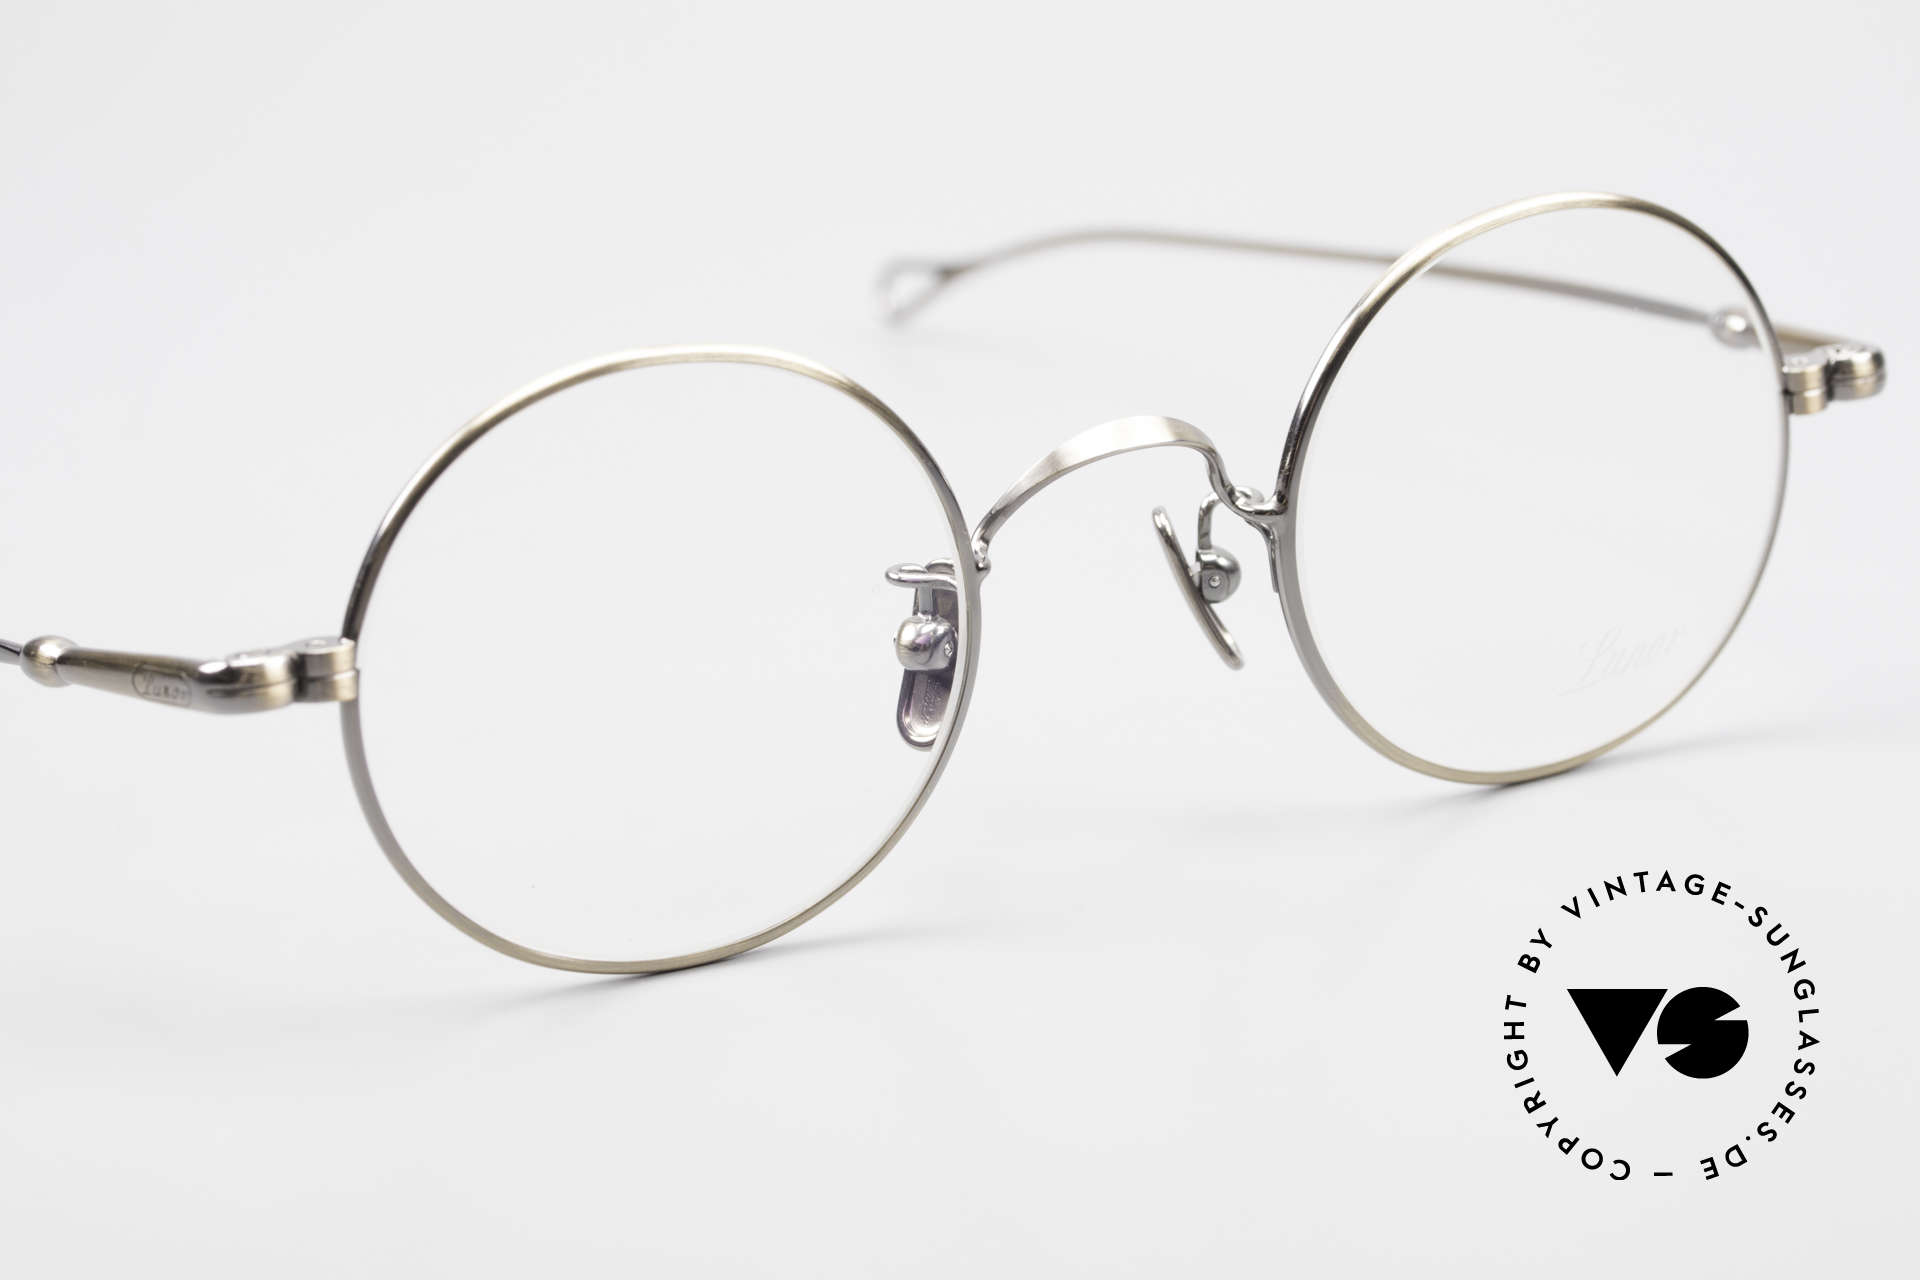 Lunor V 110 Round Lunor Glasses Vintage, from the 2011's collection, but in a well-known quality, Made for Men and Women